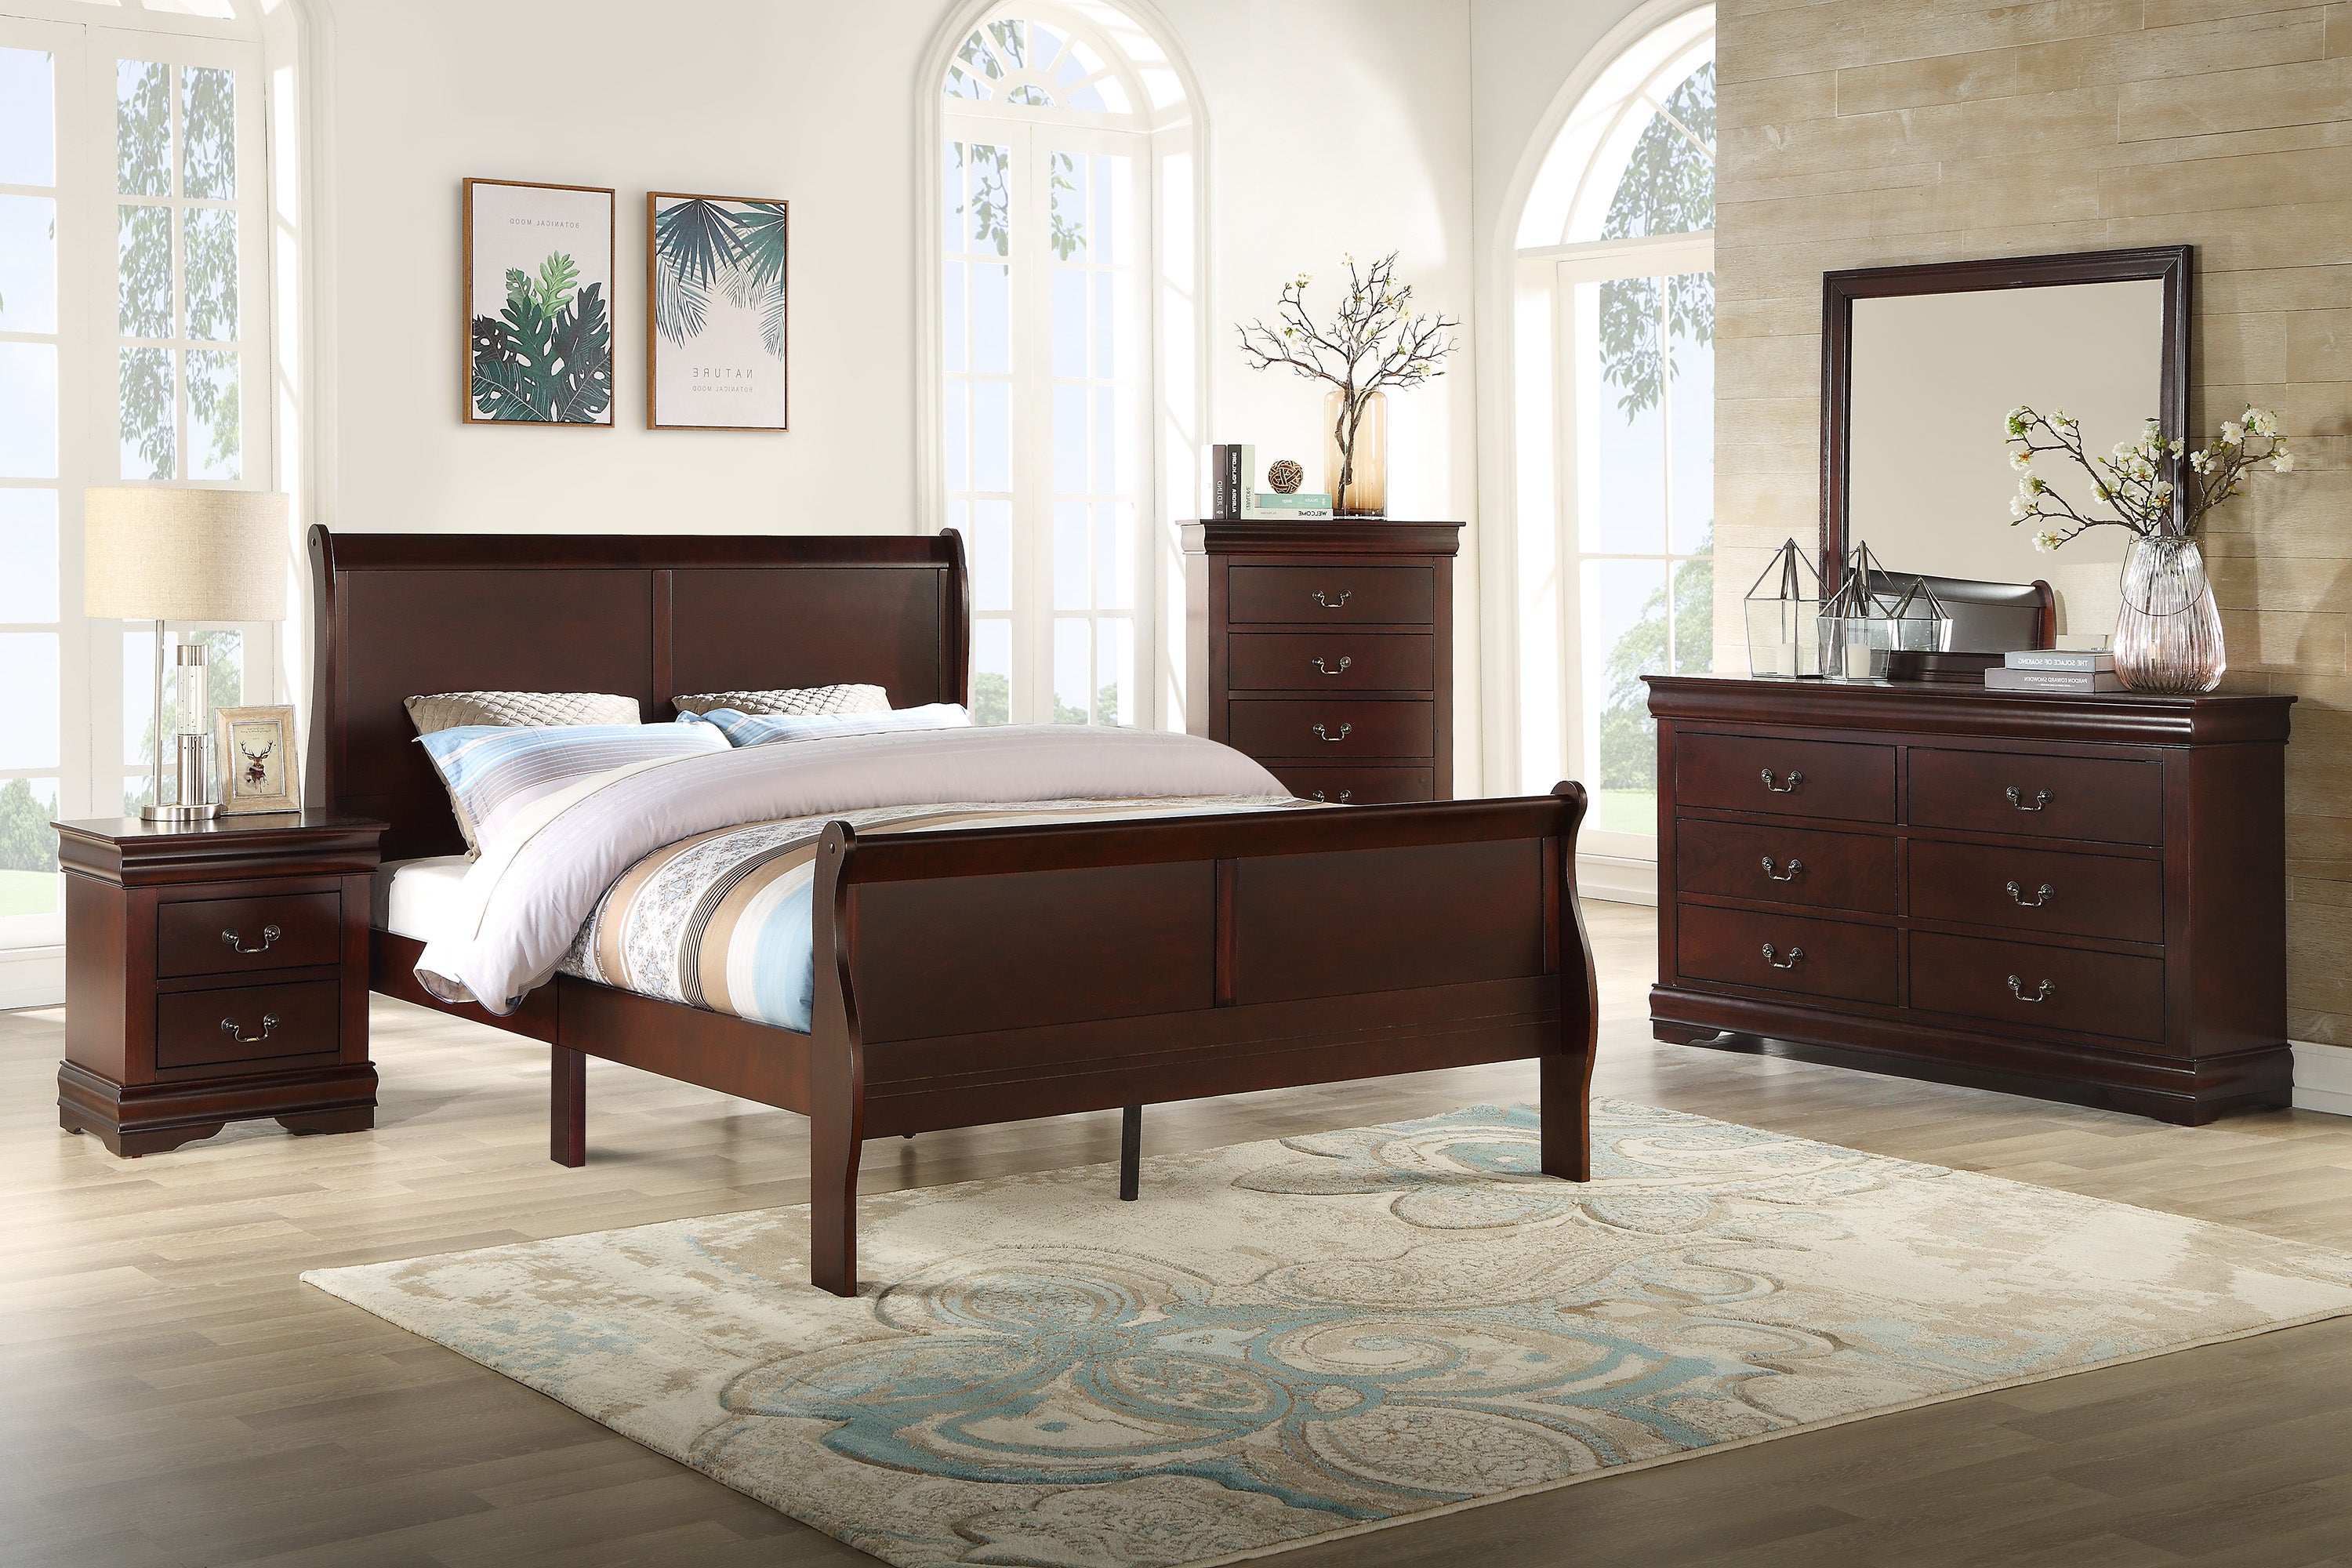 French Louis Philippe Cherry Wood King Size Sleigh Bed at 1stDibs